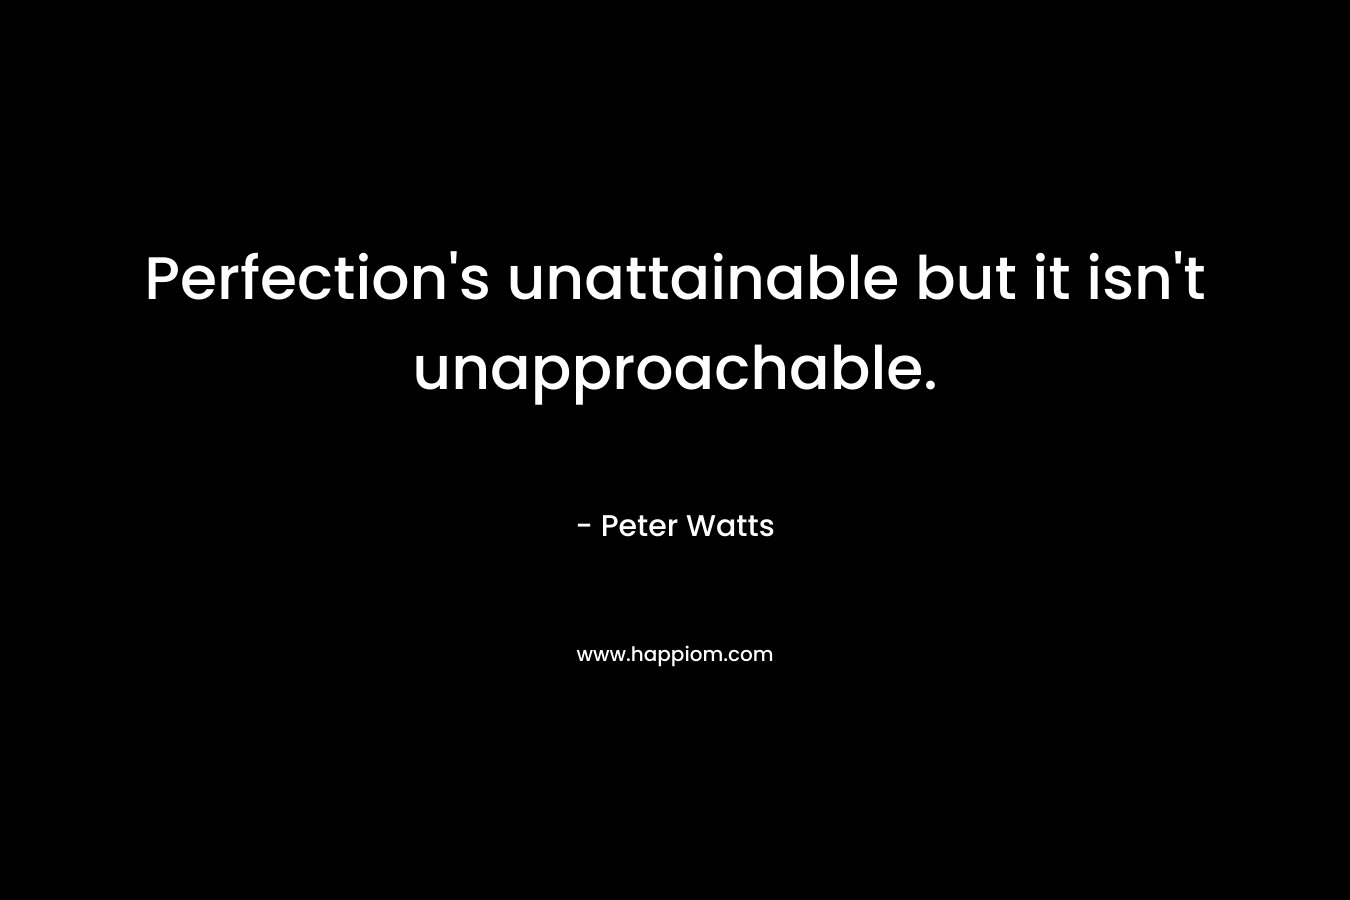 Perfection’s unattainable but it isn’t unapproachable. – Peter Watts